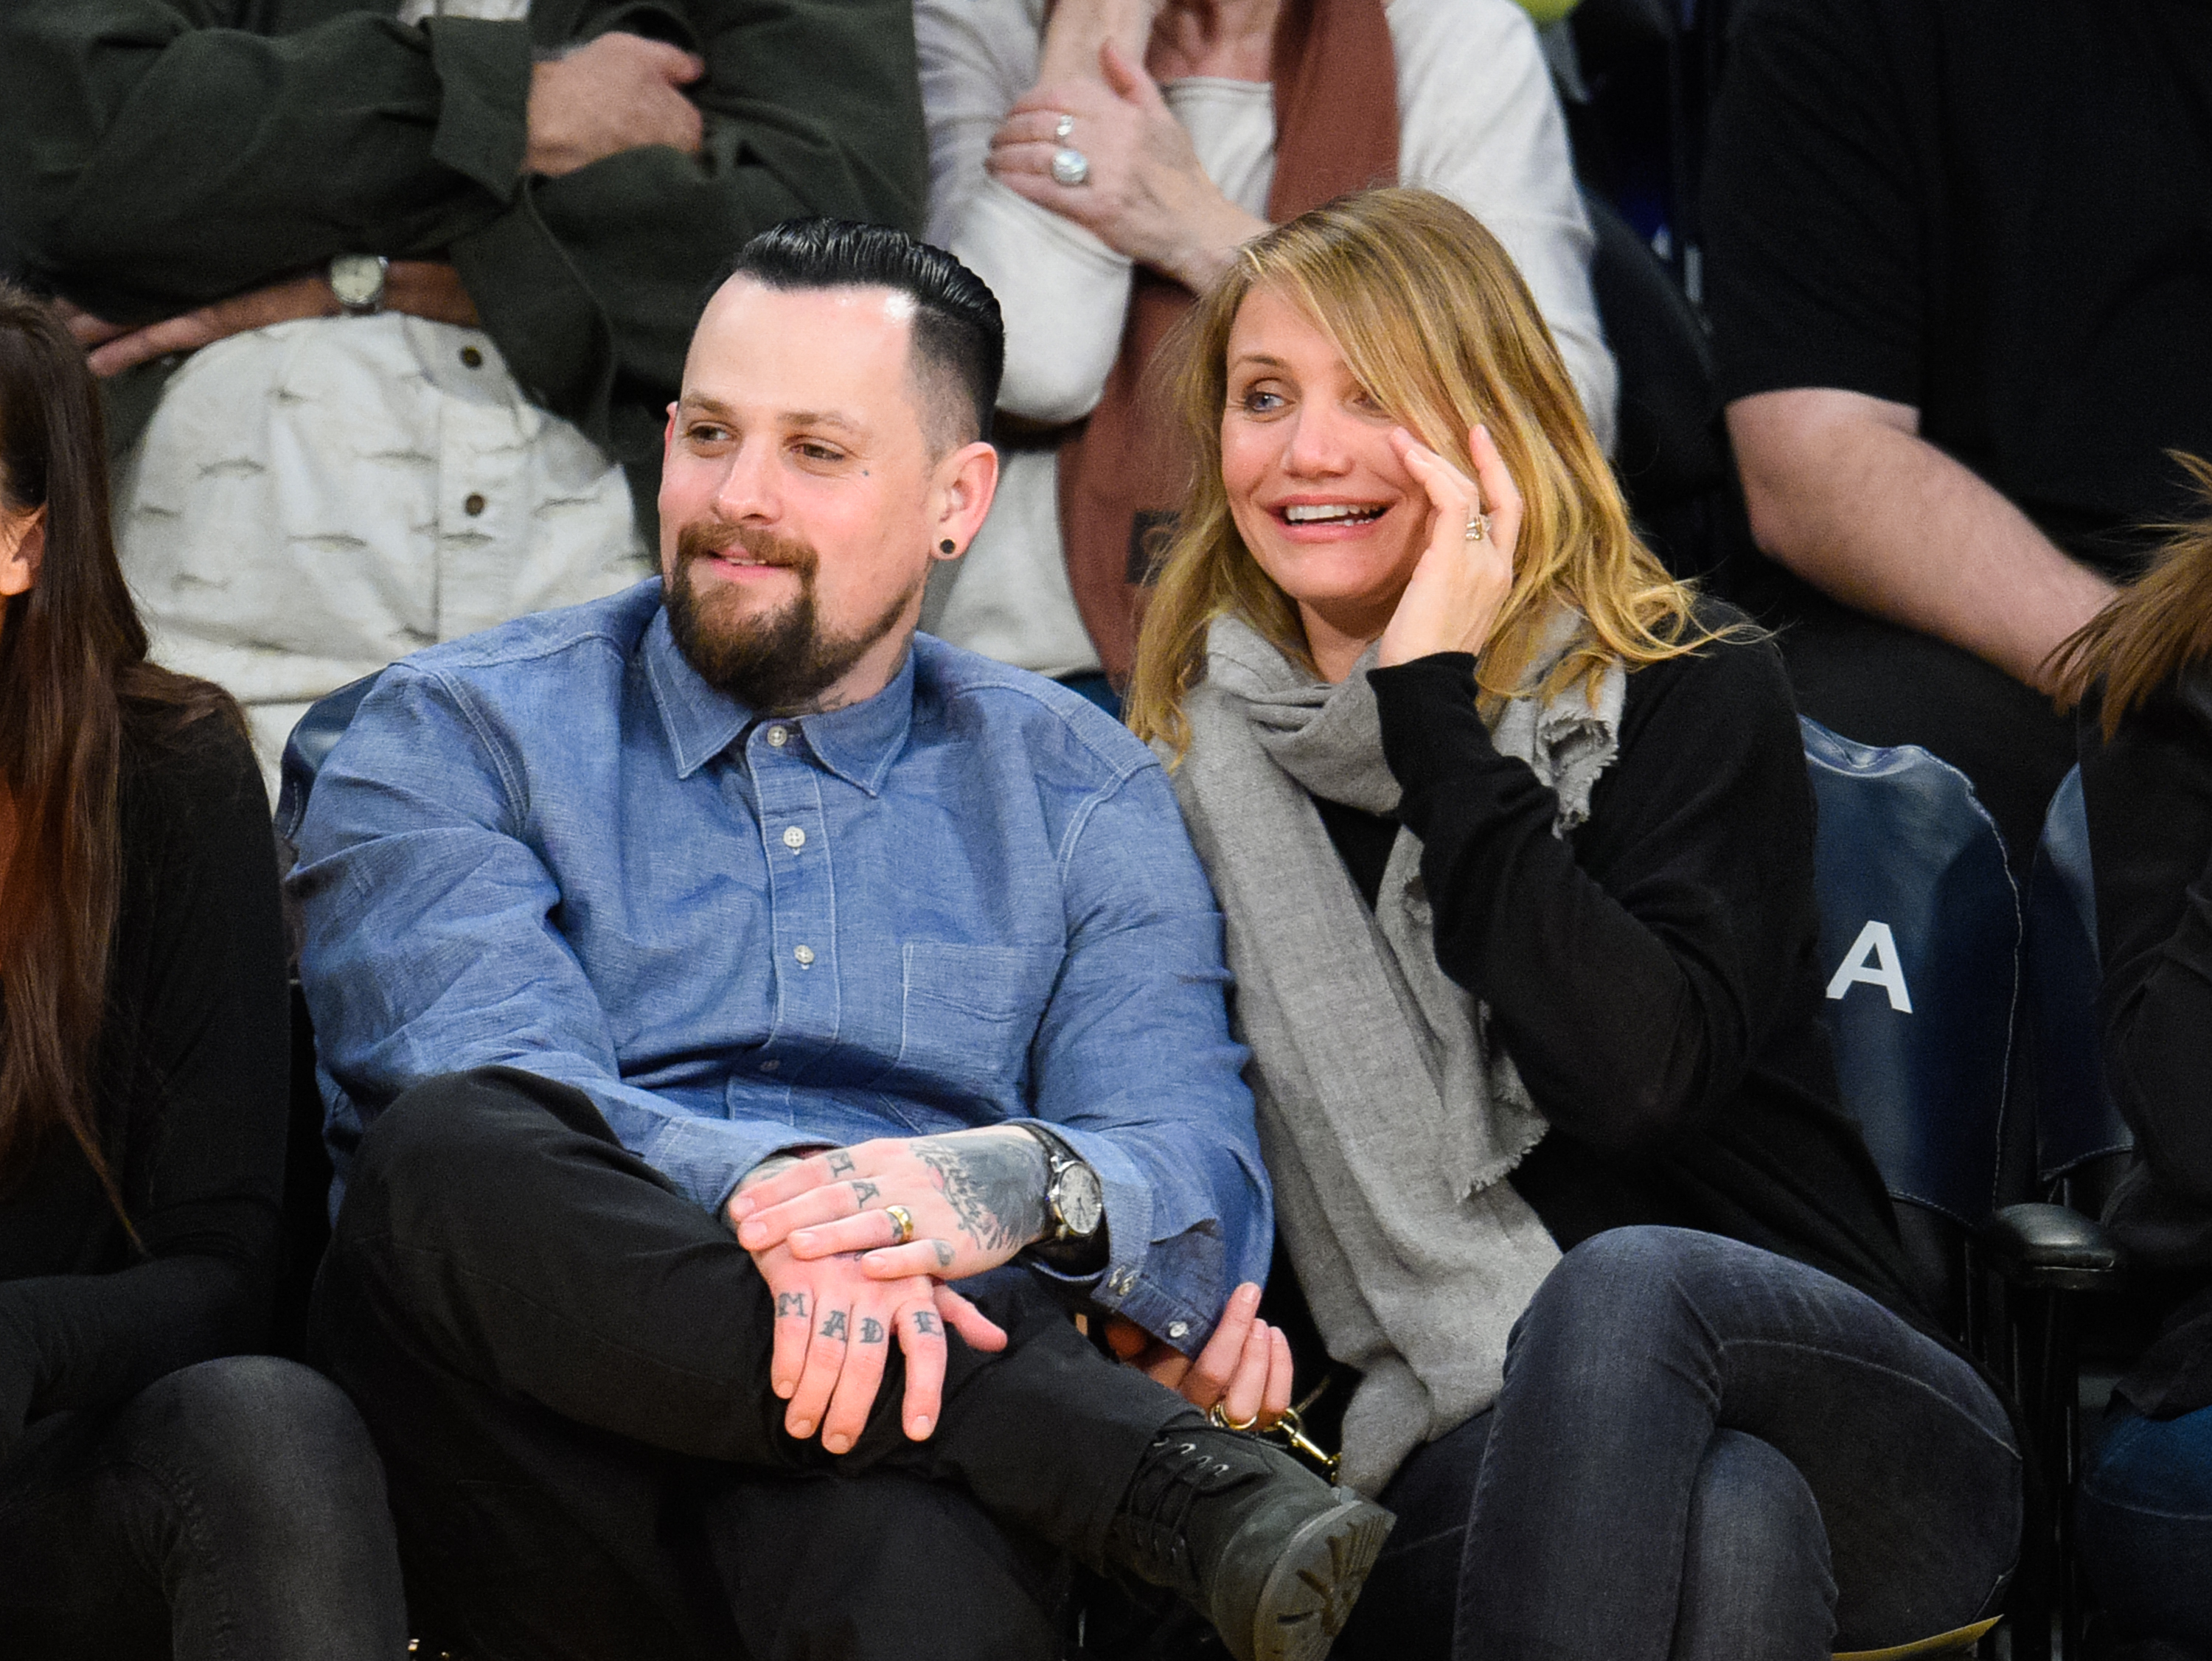 Benji Madden and Cameron Diaz during a basketball game between the Washington Wizards and the Los Angeles Lakers at Staples Center on January 27, 2015, in Los Angeles, California. | Source: Getty Images